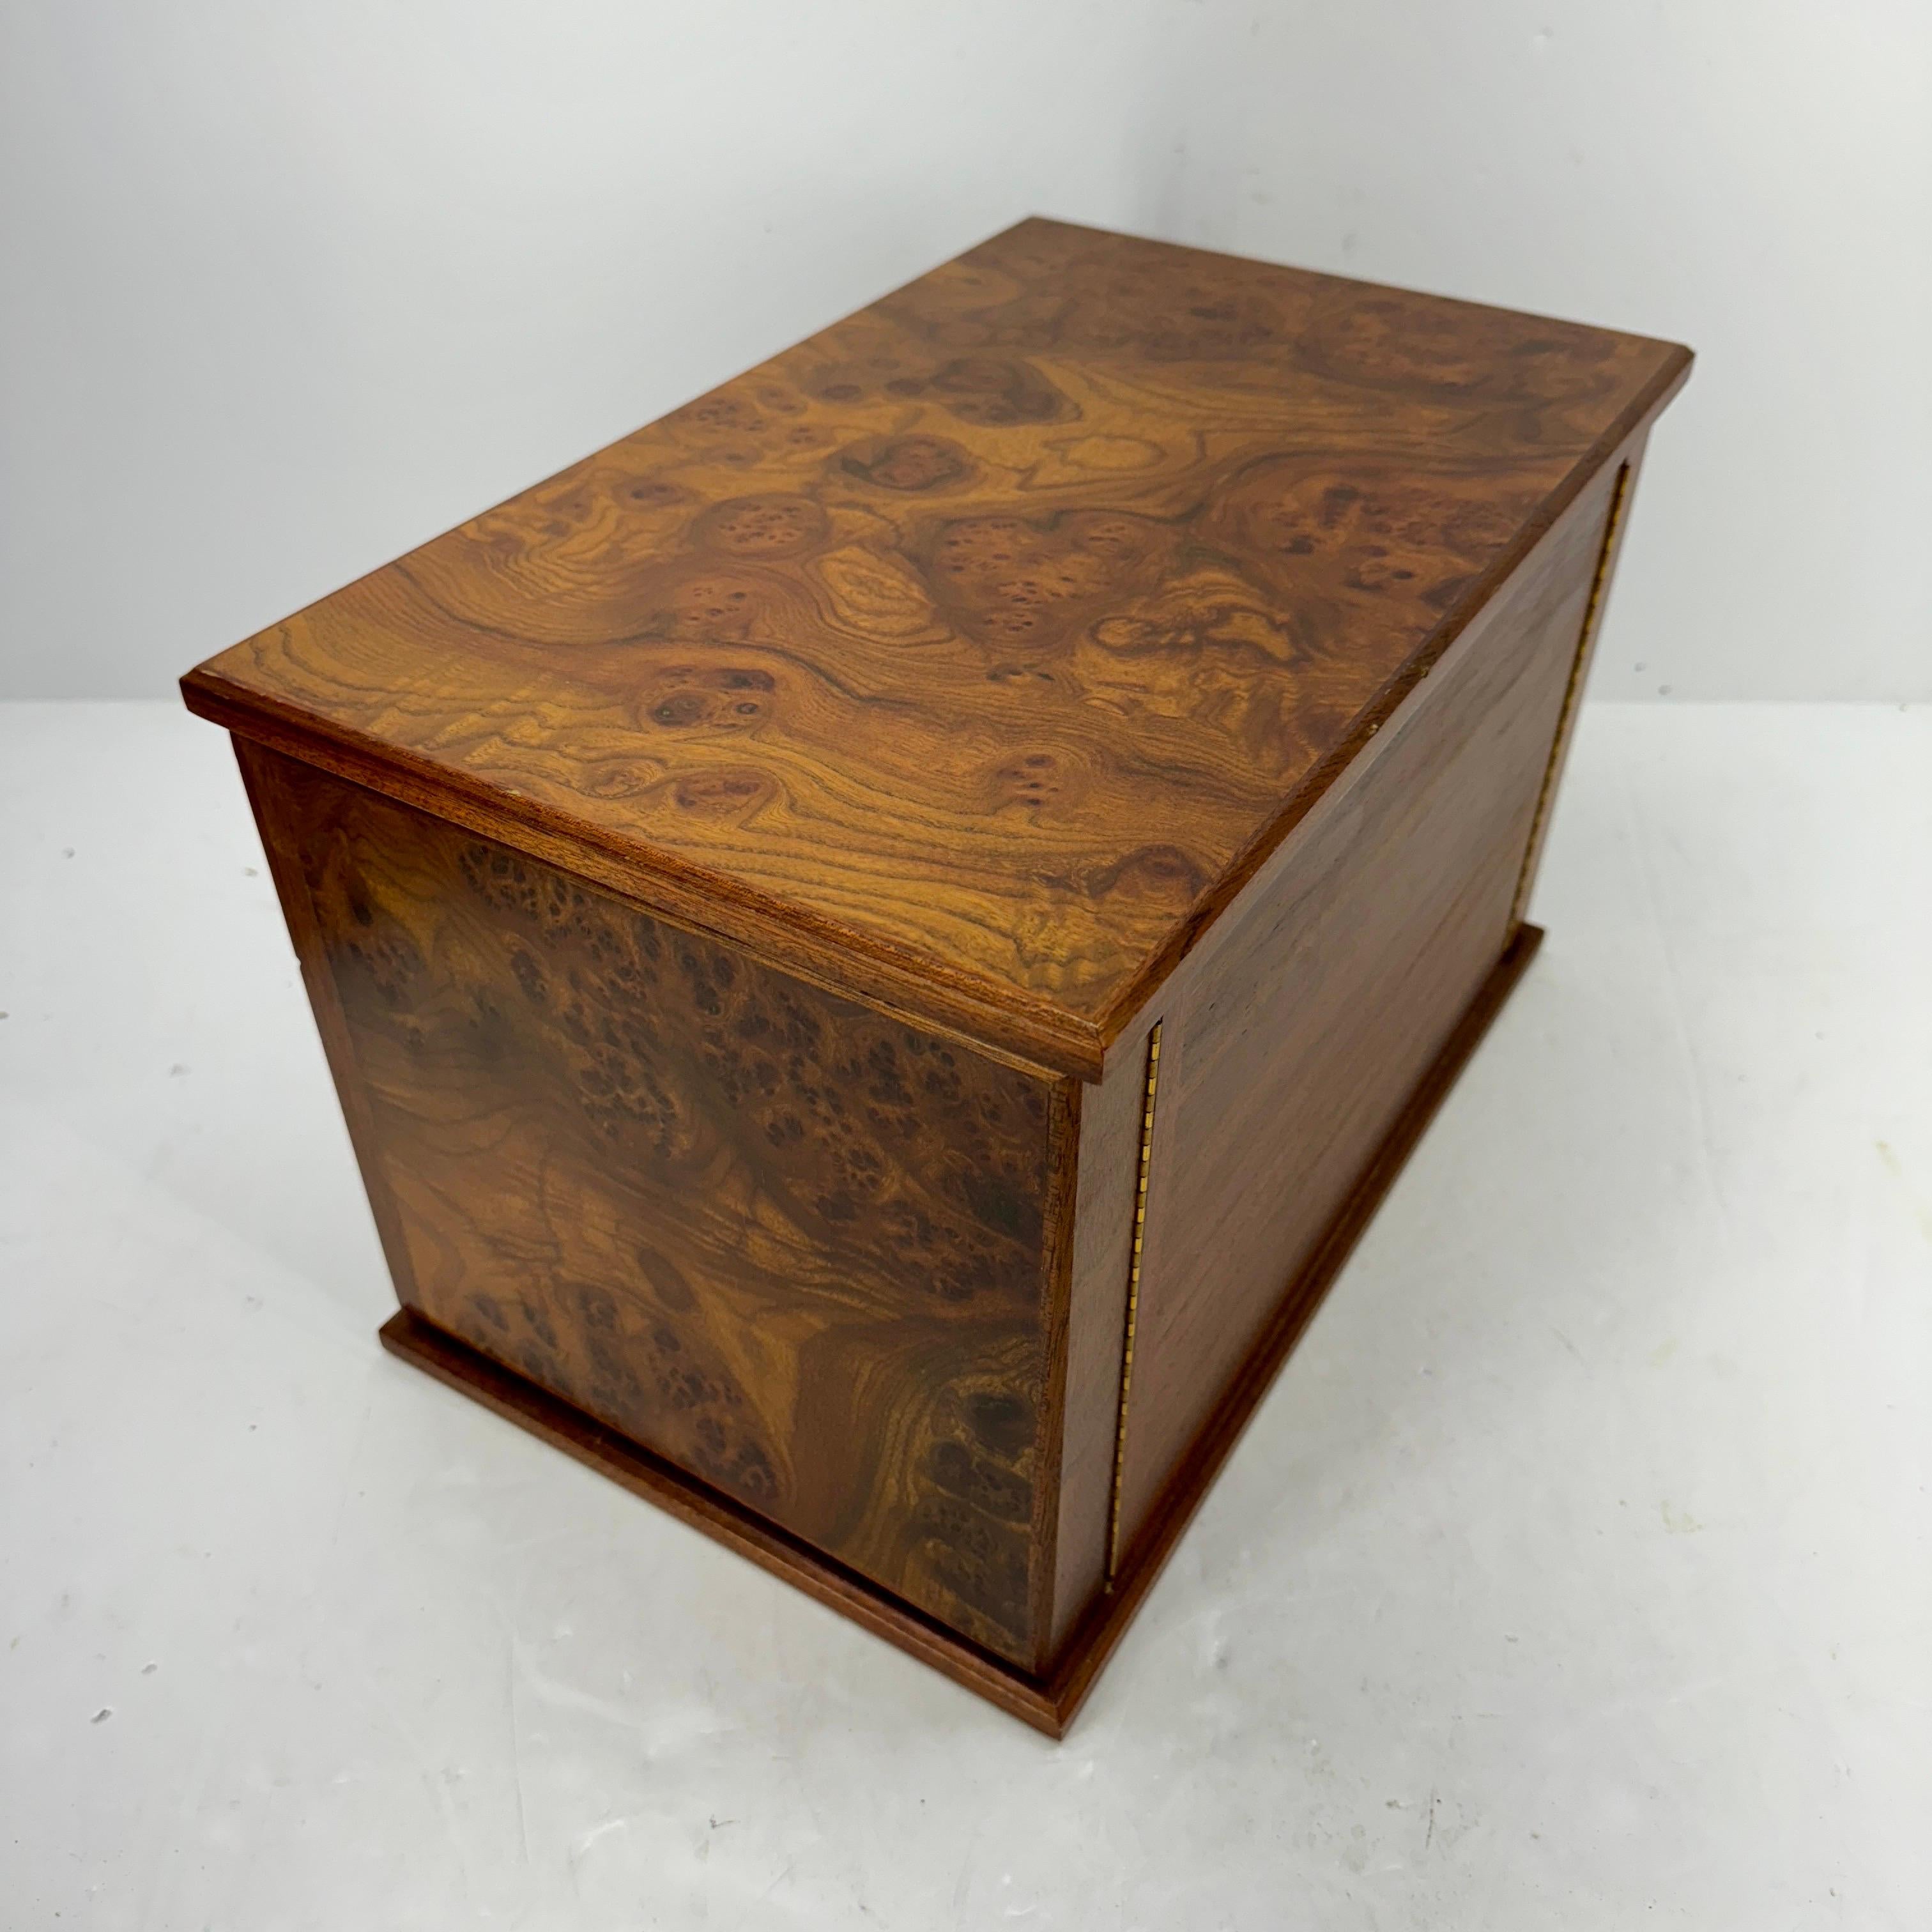 Large Italian Rectangular Burl Wood Jewelry Box With 4 Drawers For Sale 6